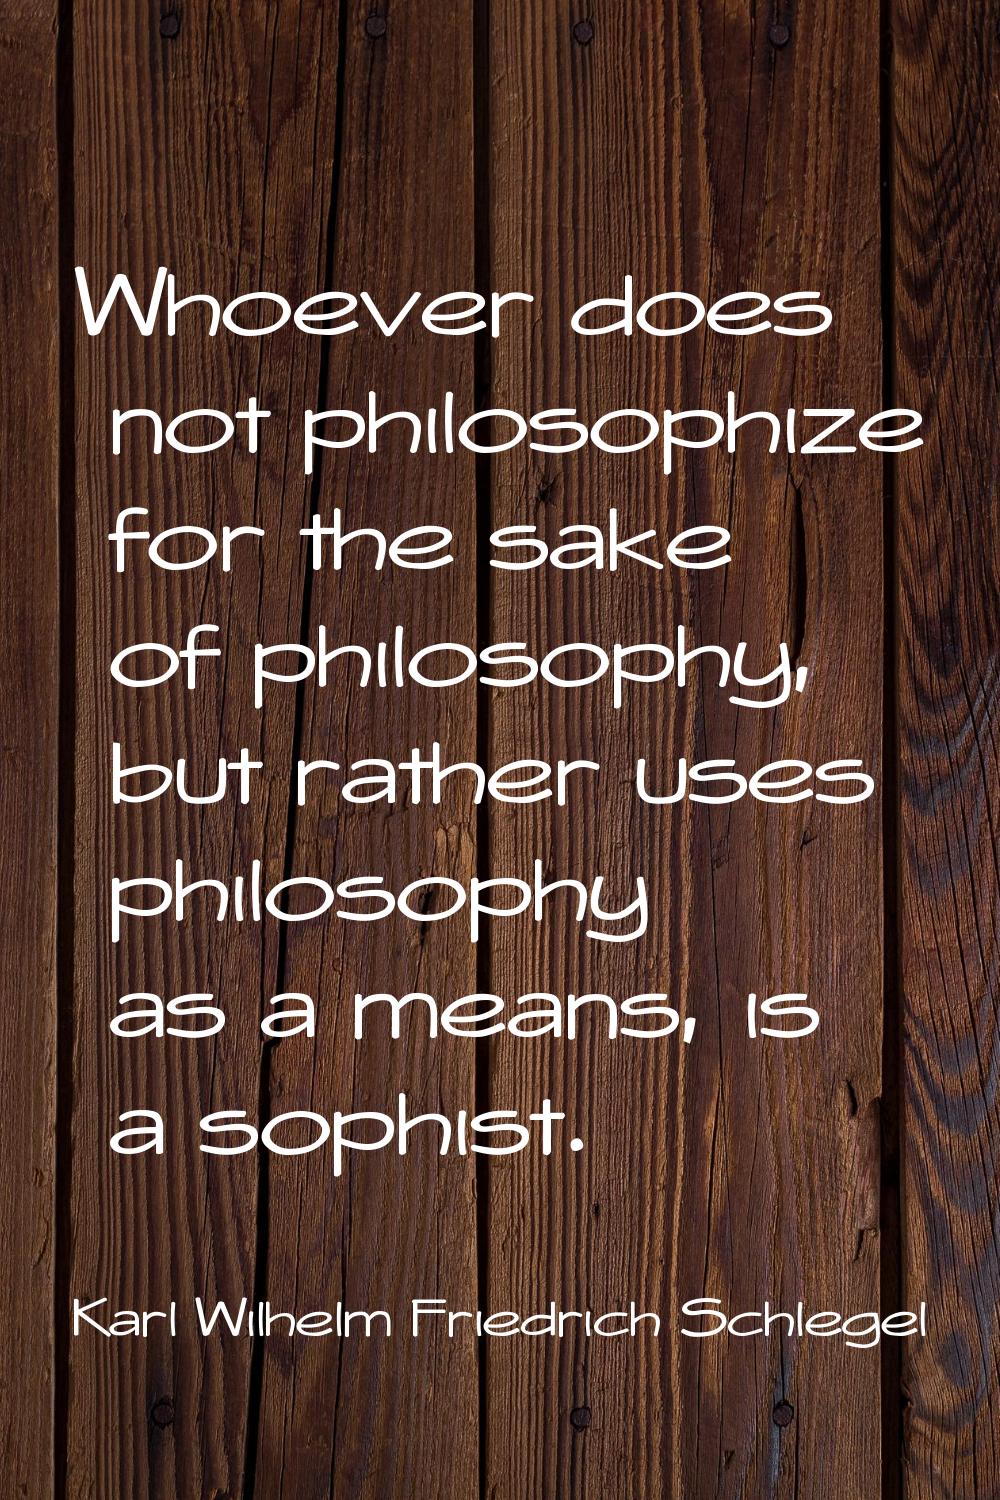 Whoever does not philosophize for the sake of philosophy, but rather uses philosophy as a means, is